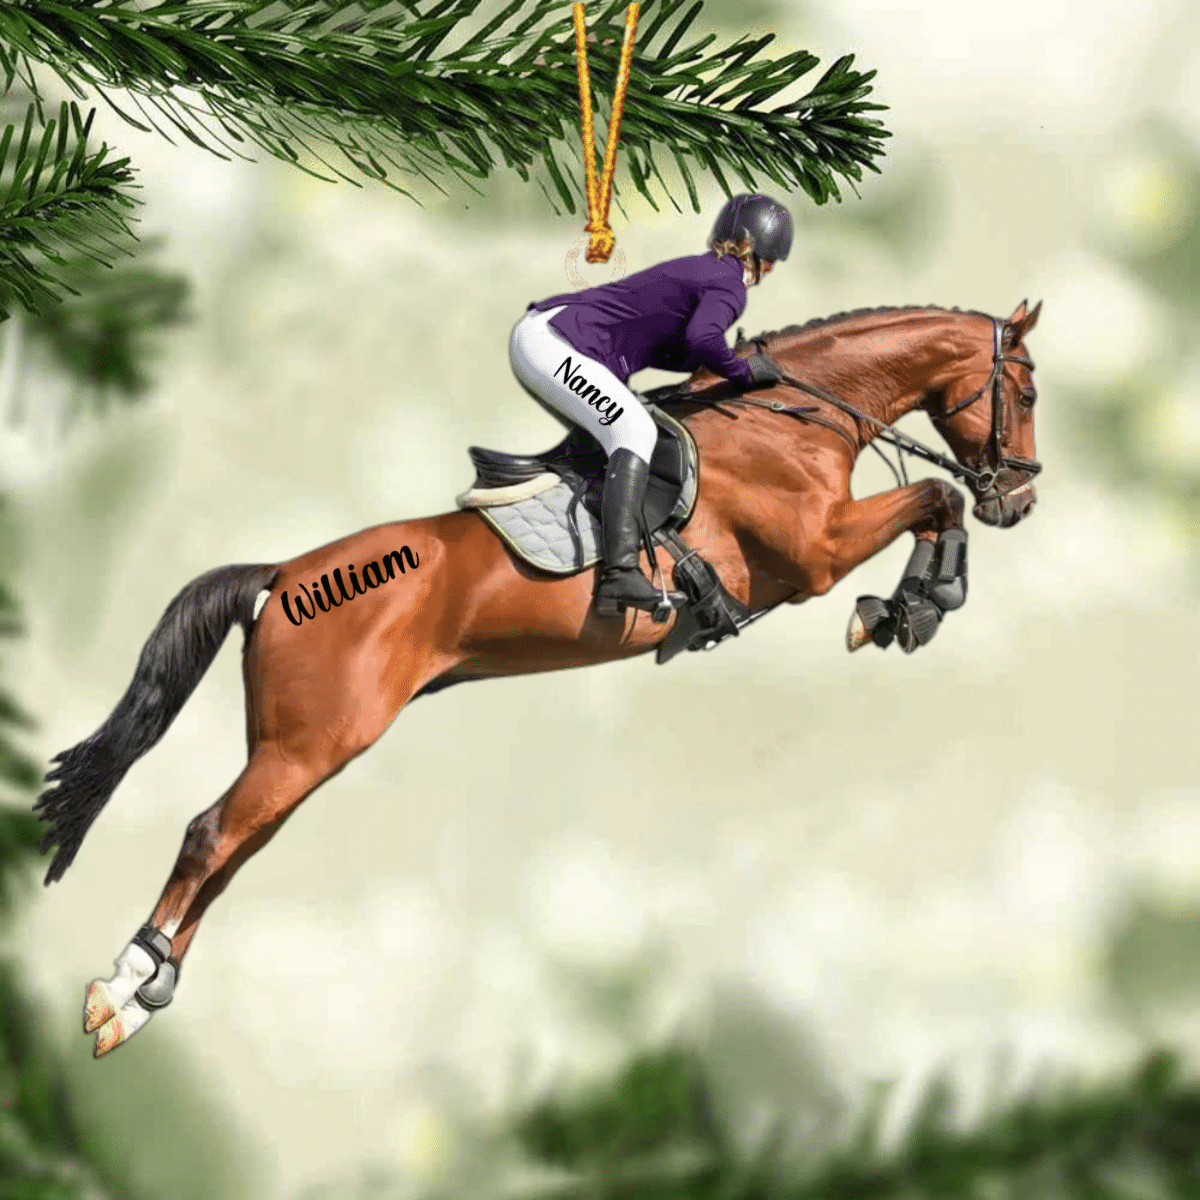 Personalized Equestrian Girl Ornament - Gift Idea For Horse Lover/ Christmas